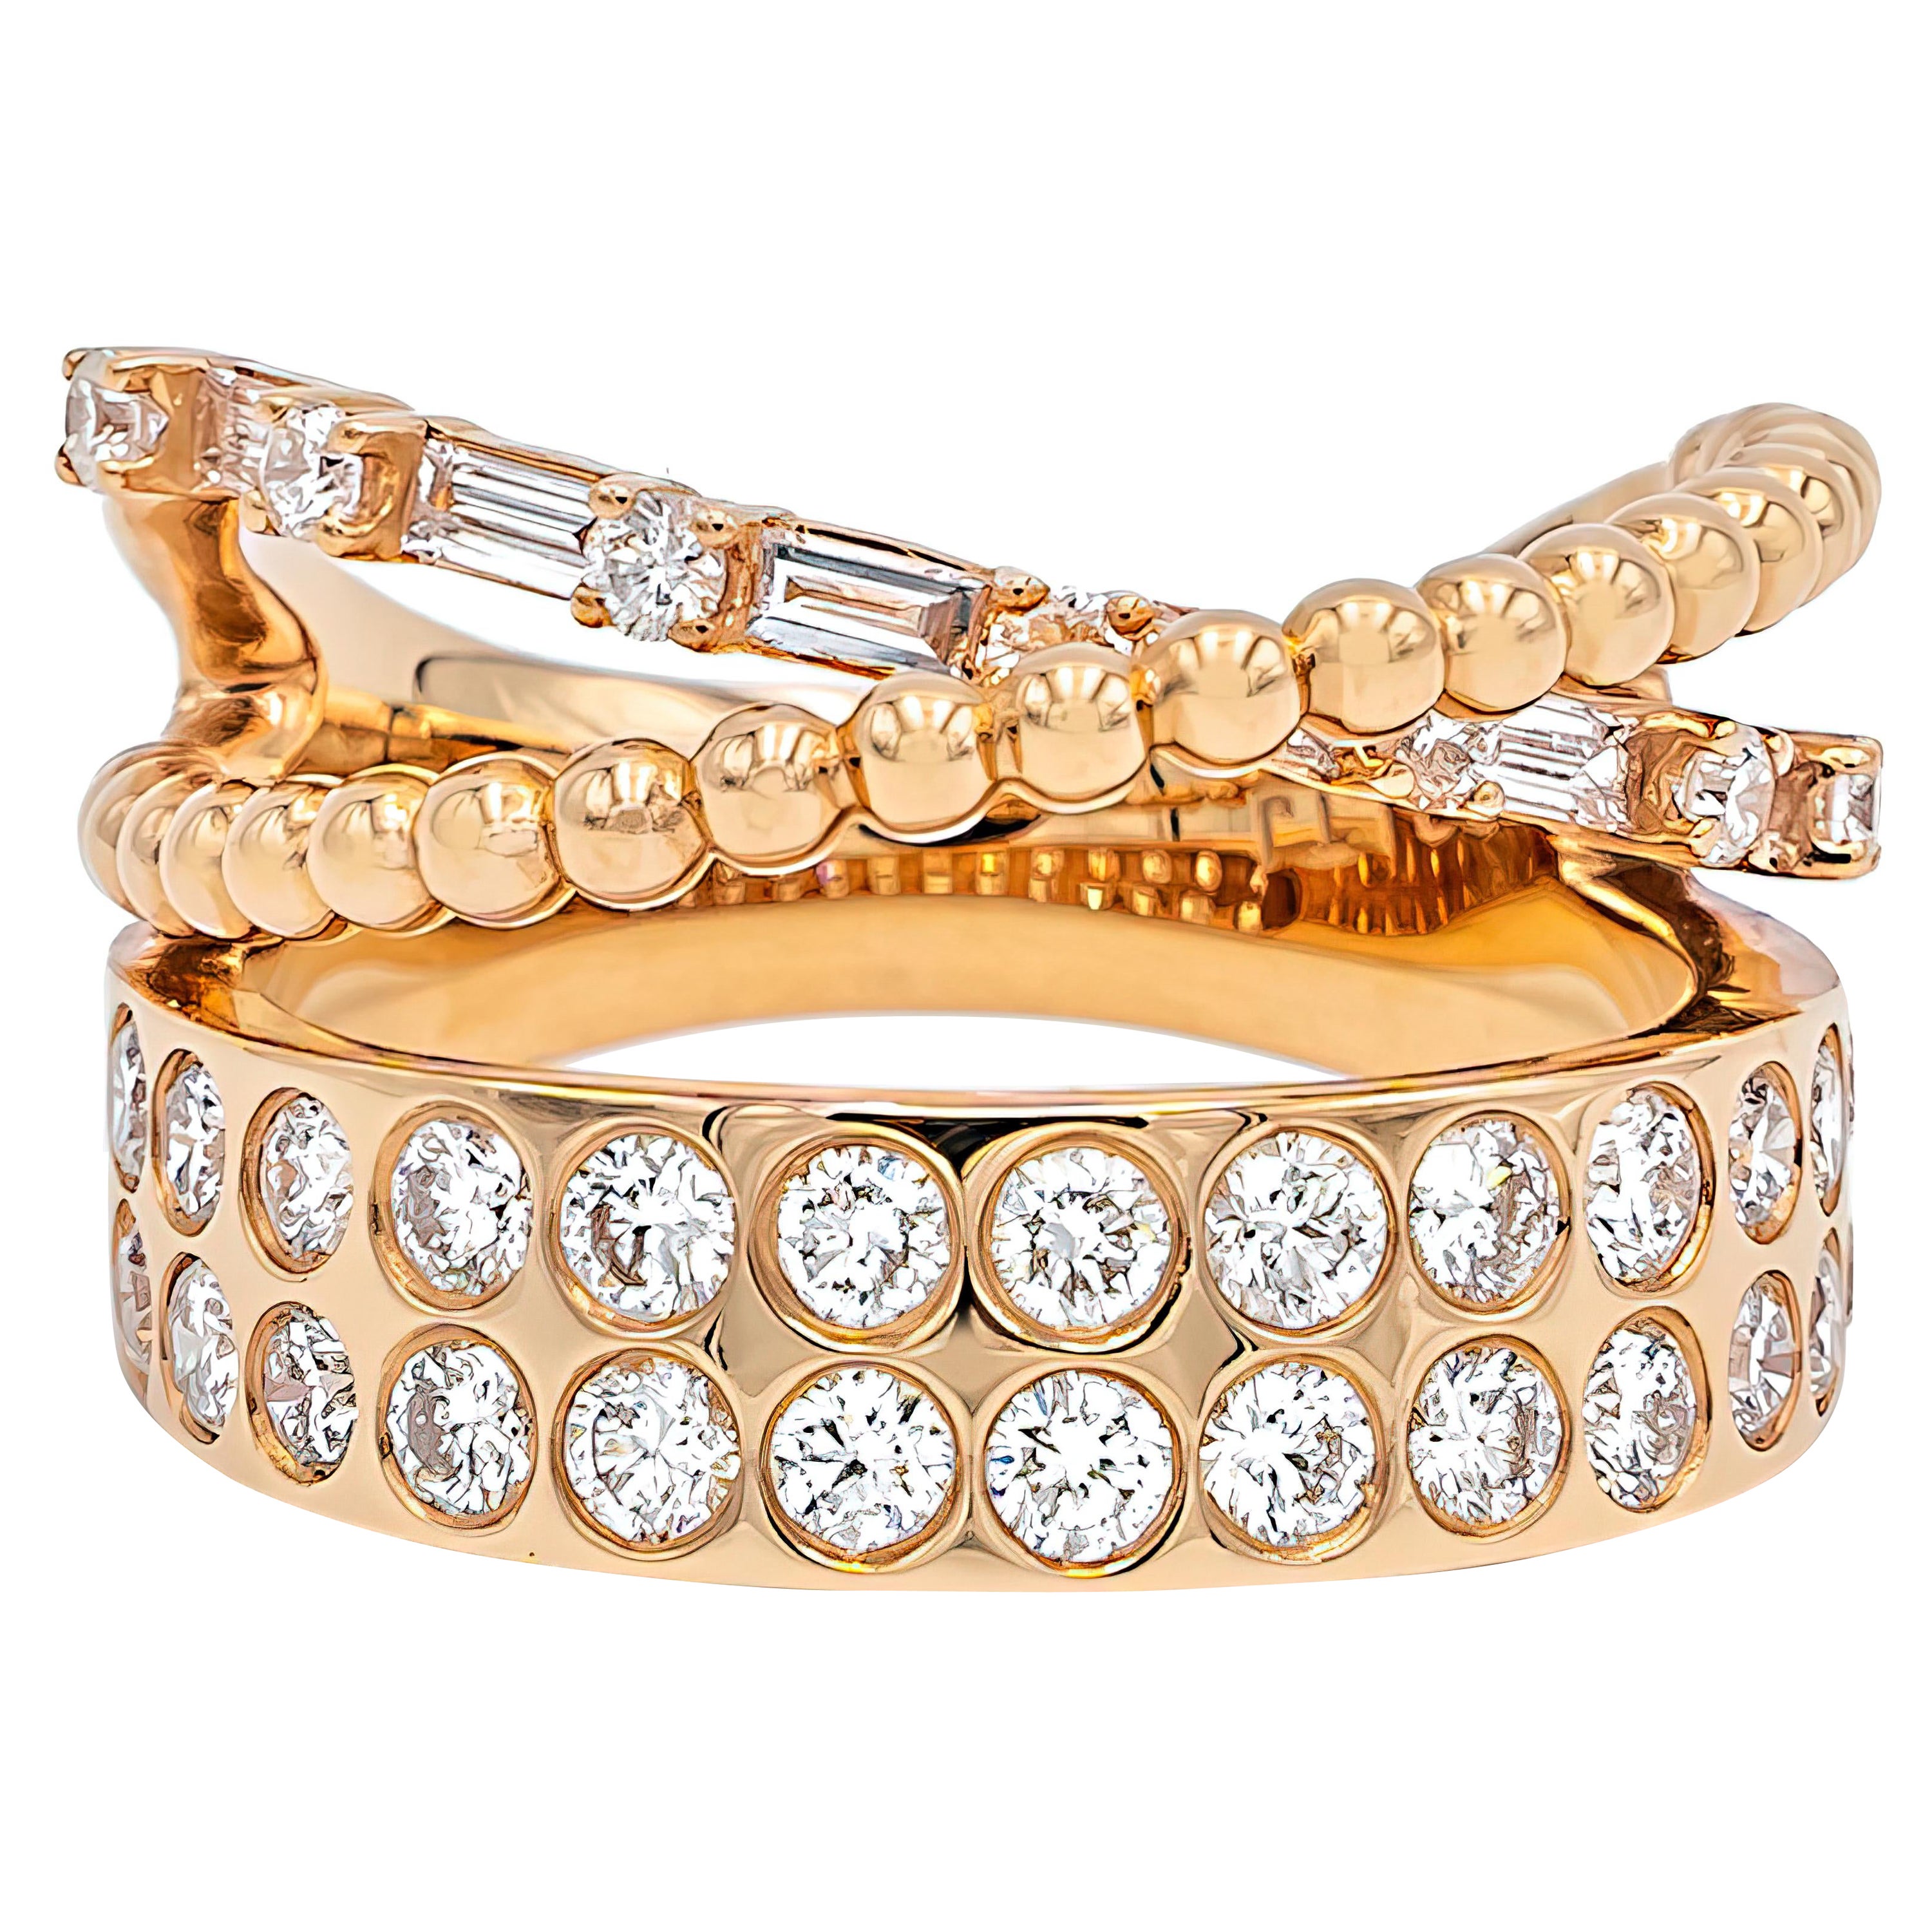 Mix and Matched Round and Tapered Diamonds in Criss Cross Bands, 18k Gold Ring